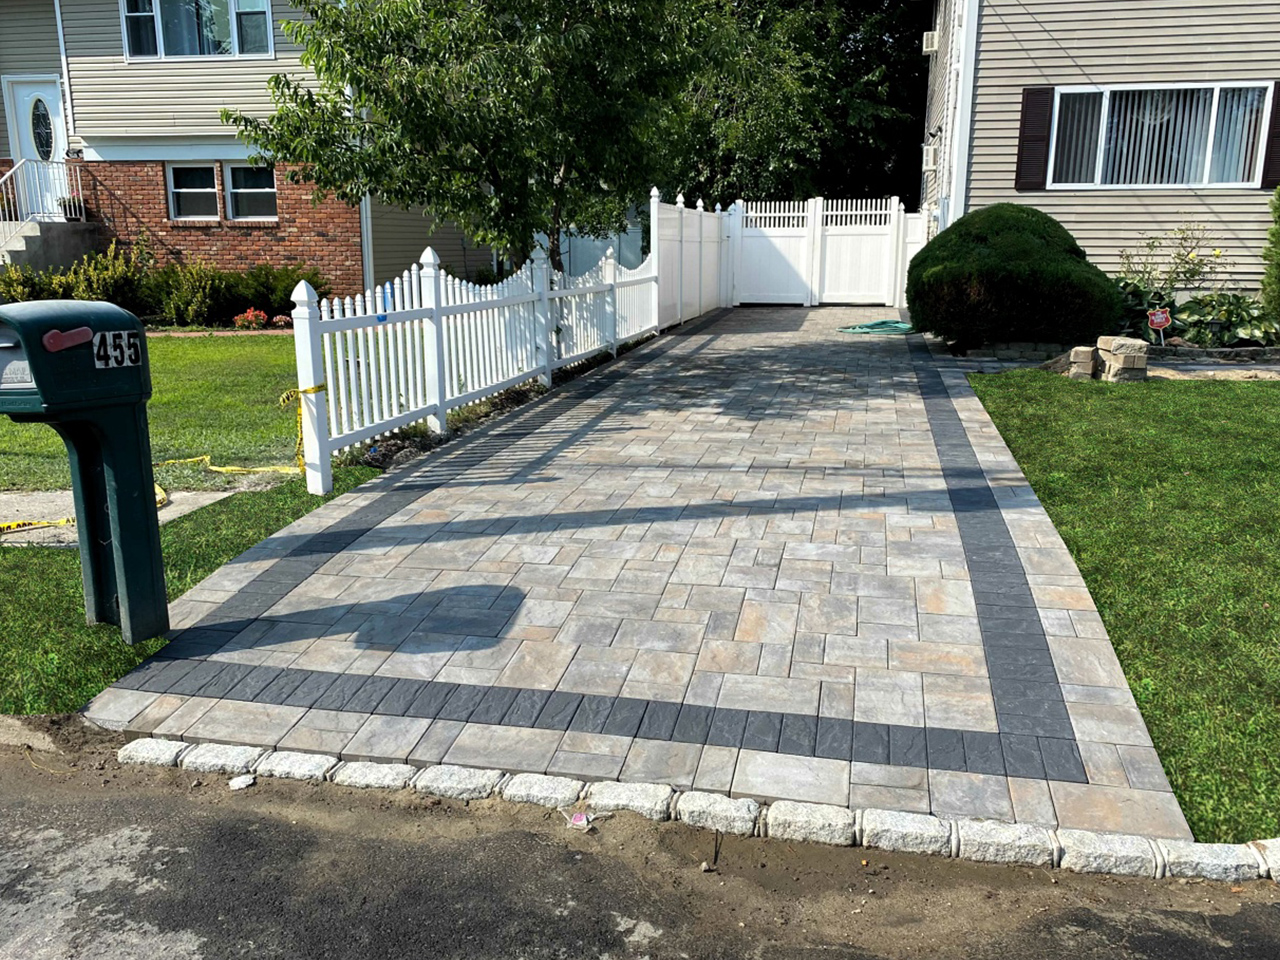 A stunning driveway project by Affordable Patio, blending seamlessly with the surrounding landscape